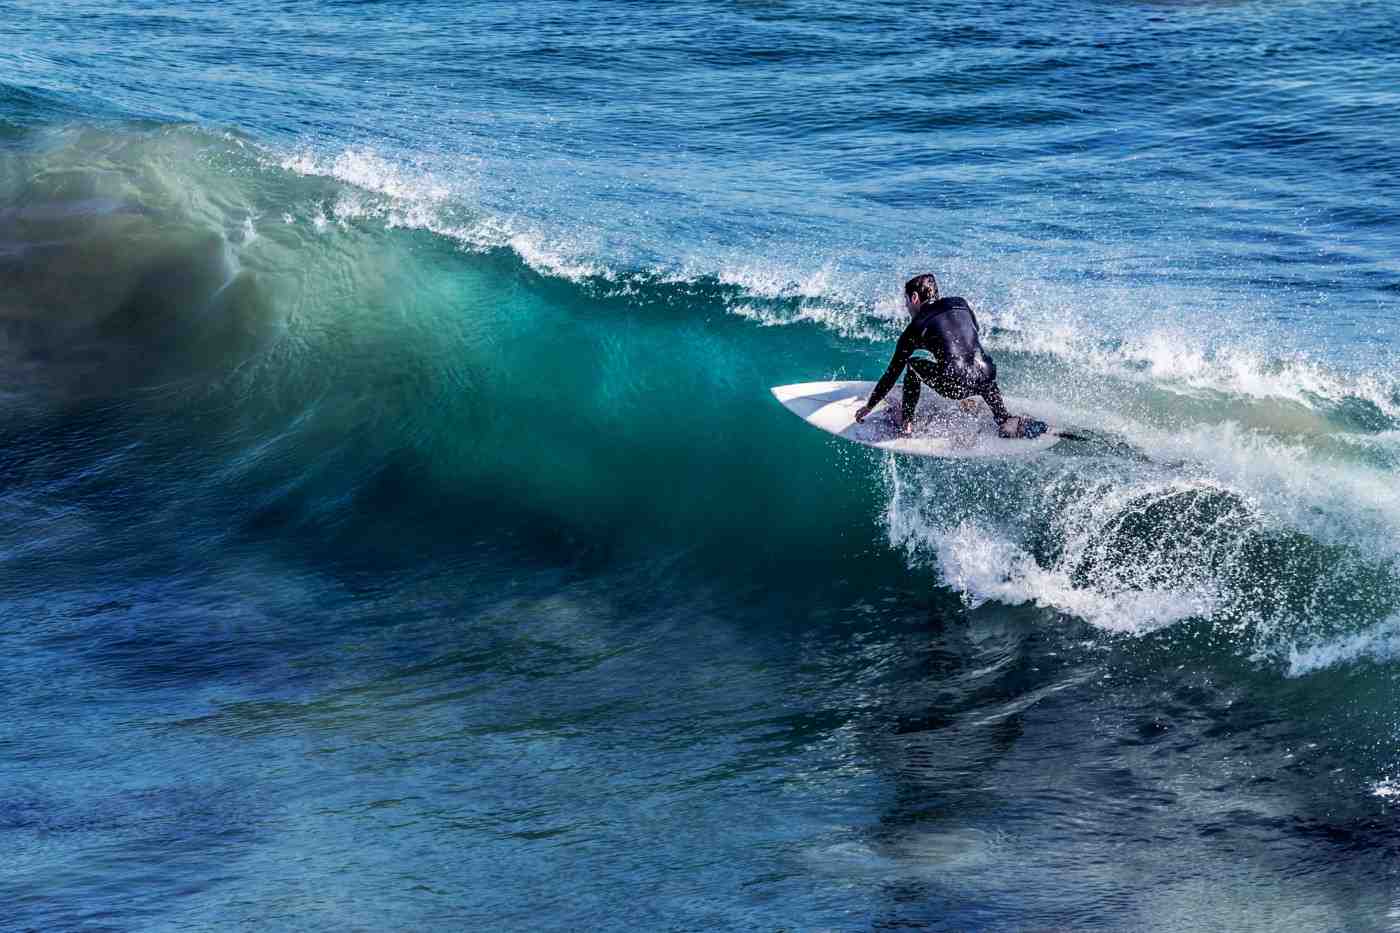 How can I practice surfing without surfing?